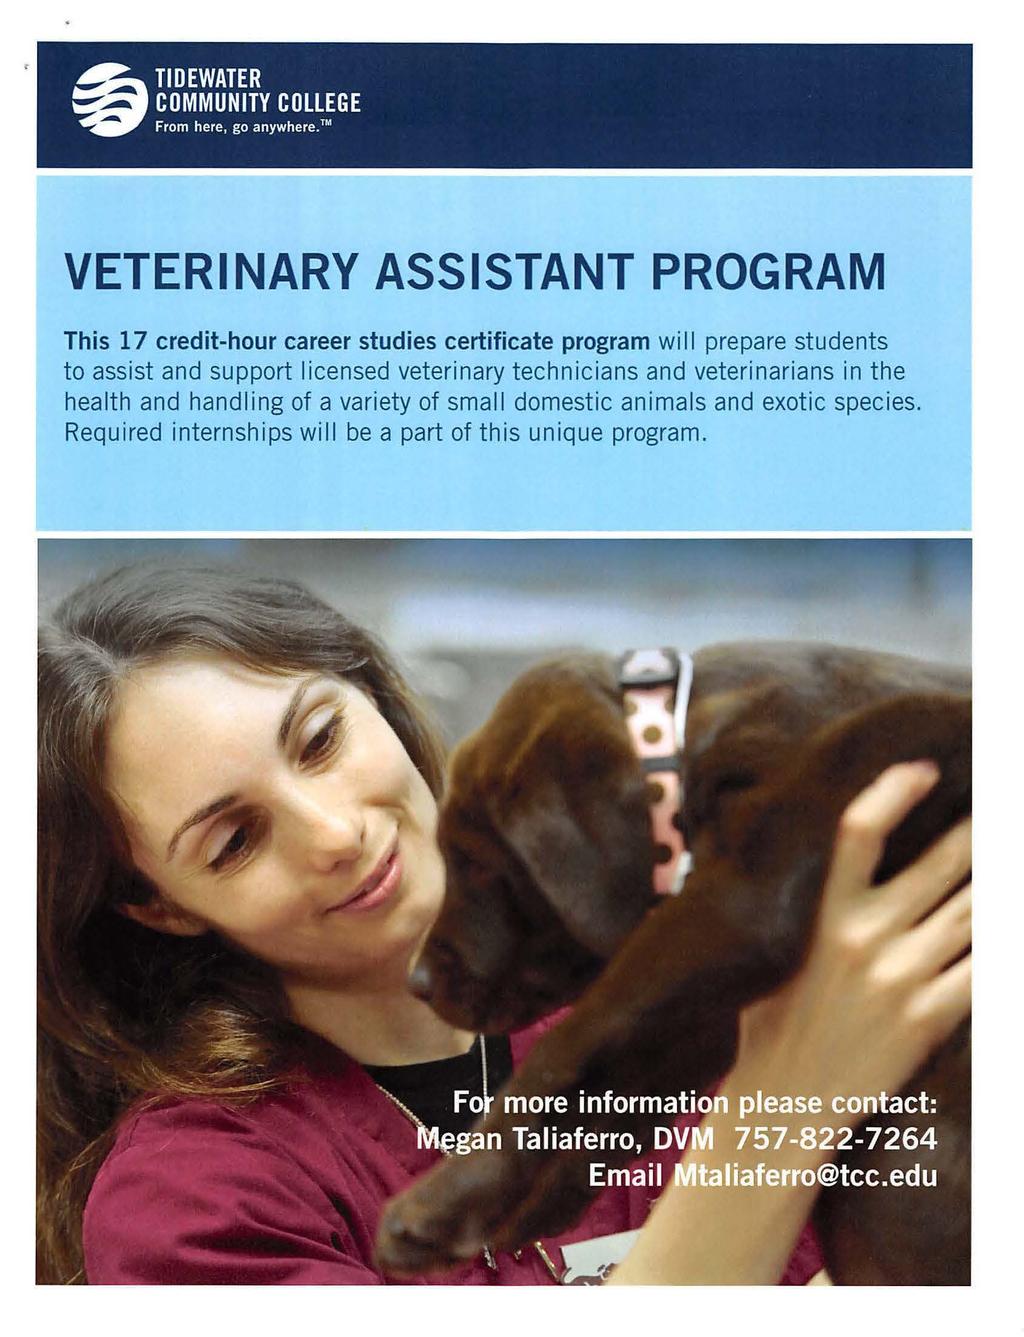 VETERINARY ASSISTANT PROGRAM This 17 credit-hour career studies certificate program wi 11 prepare students to assist and support licensed veterinary technicians and